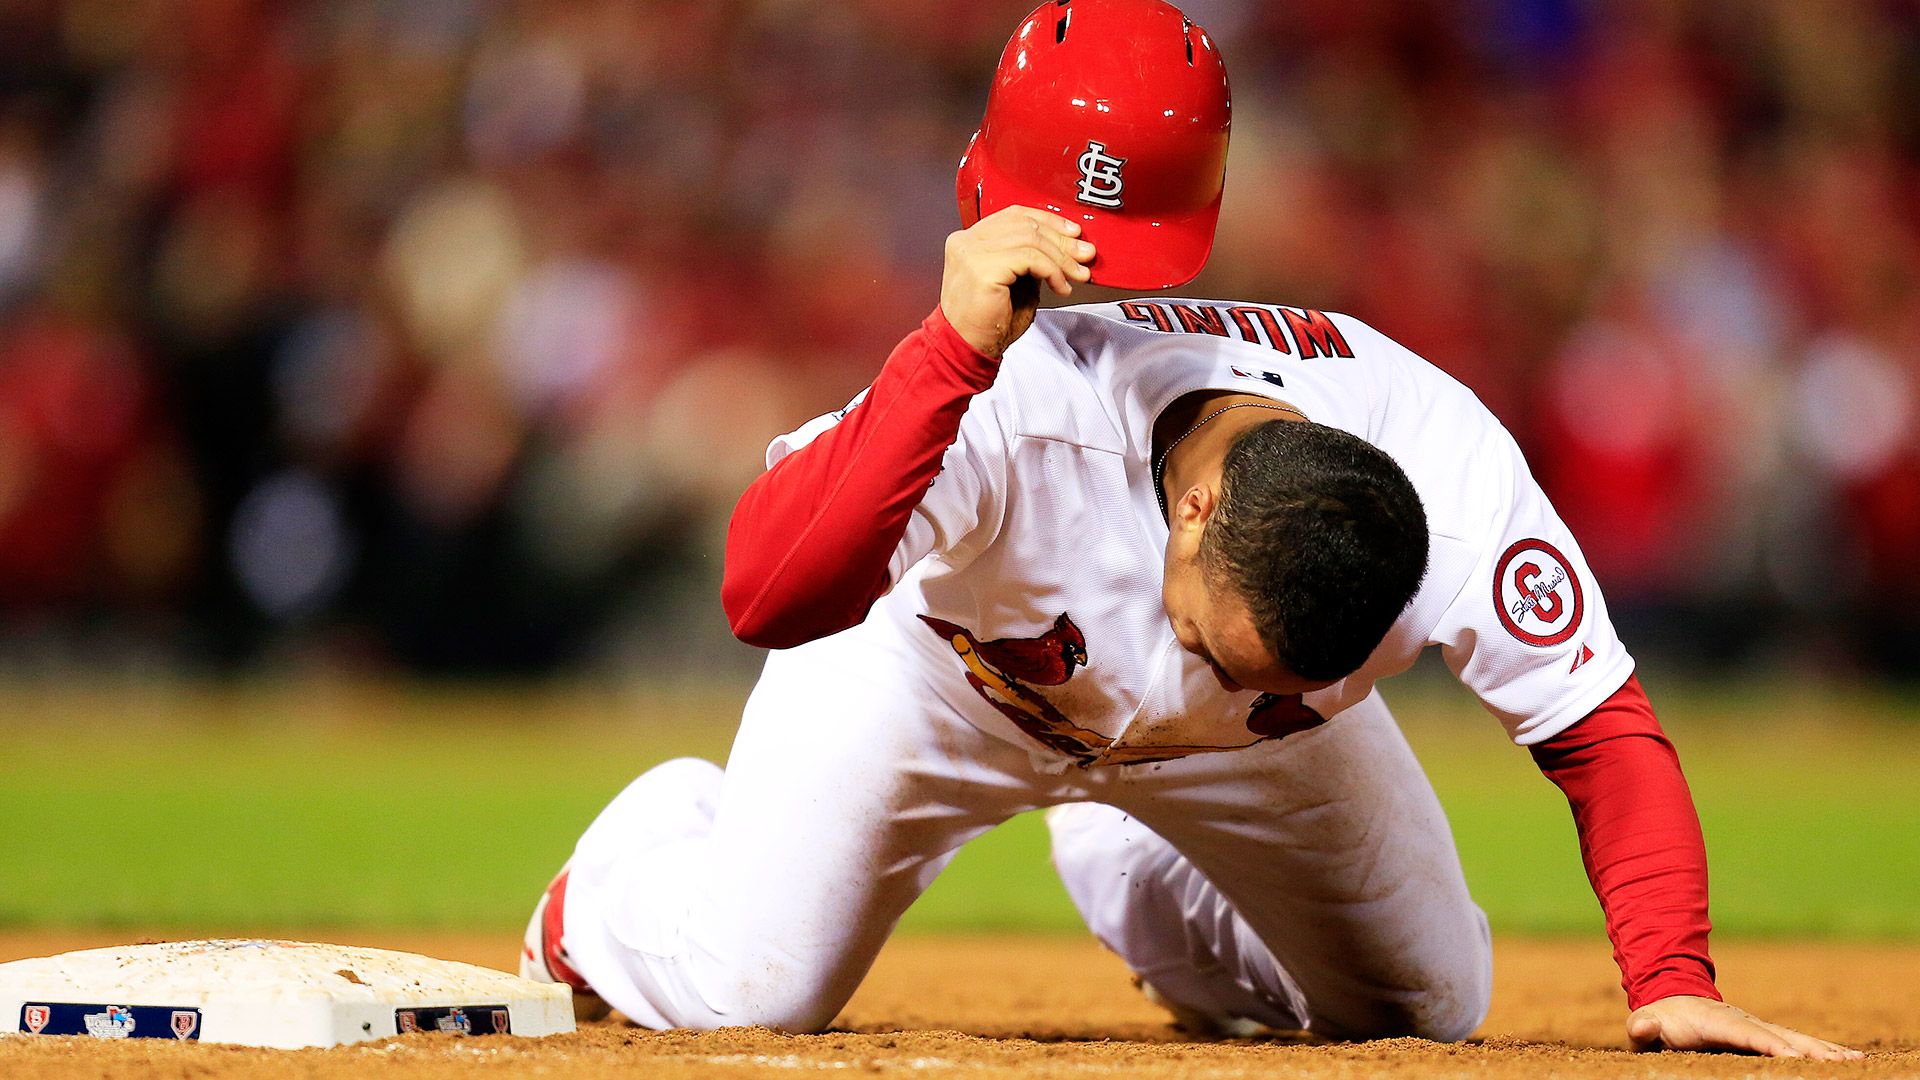 St. Louis Cardinals unhappy with Kolten Wong saying he wants to be traded